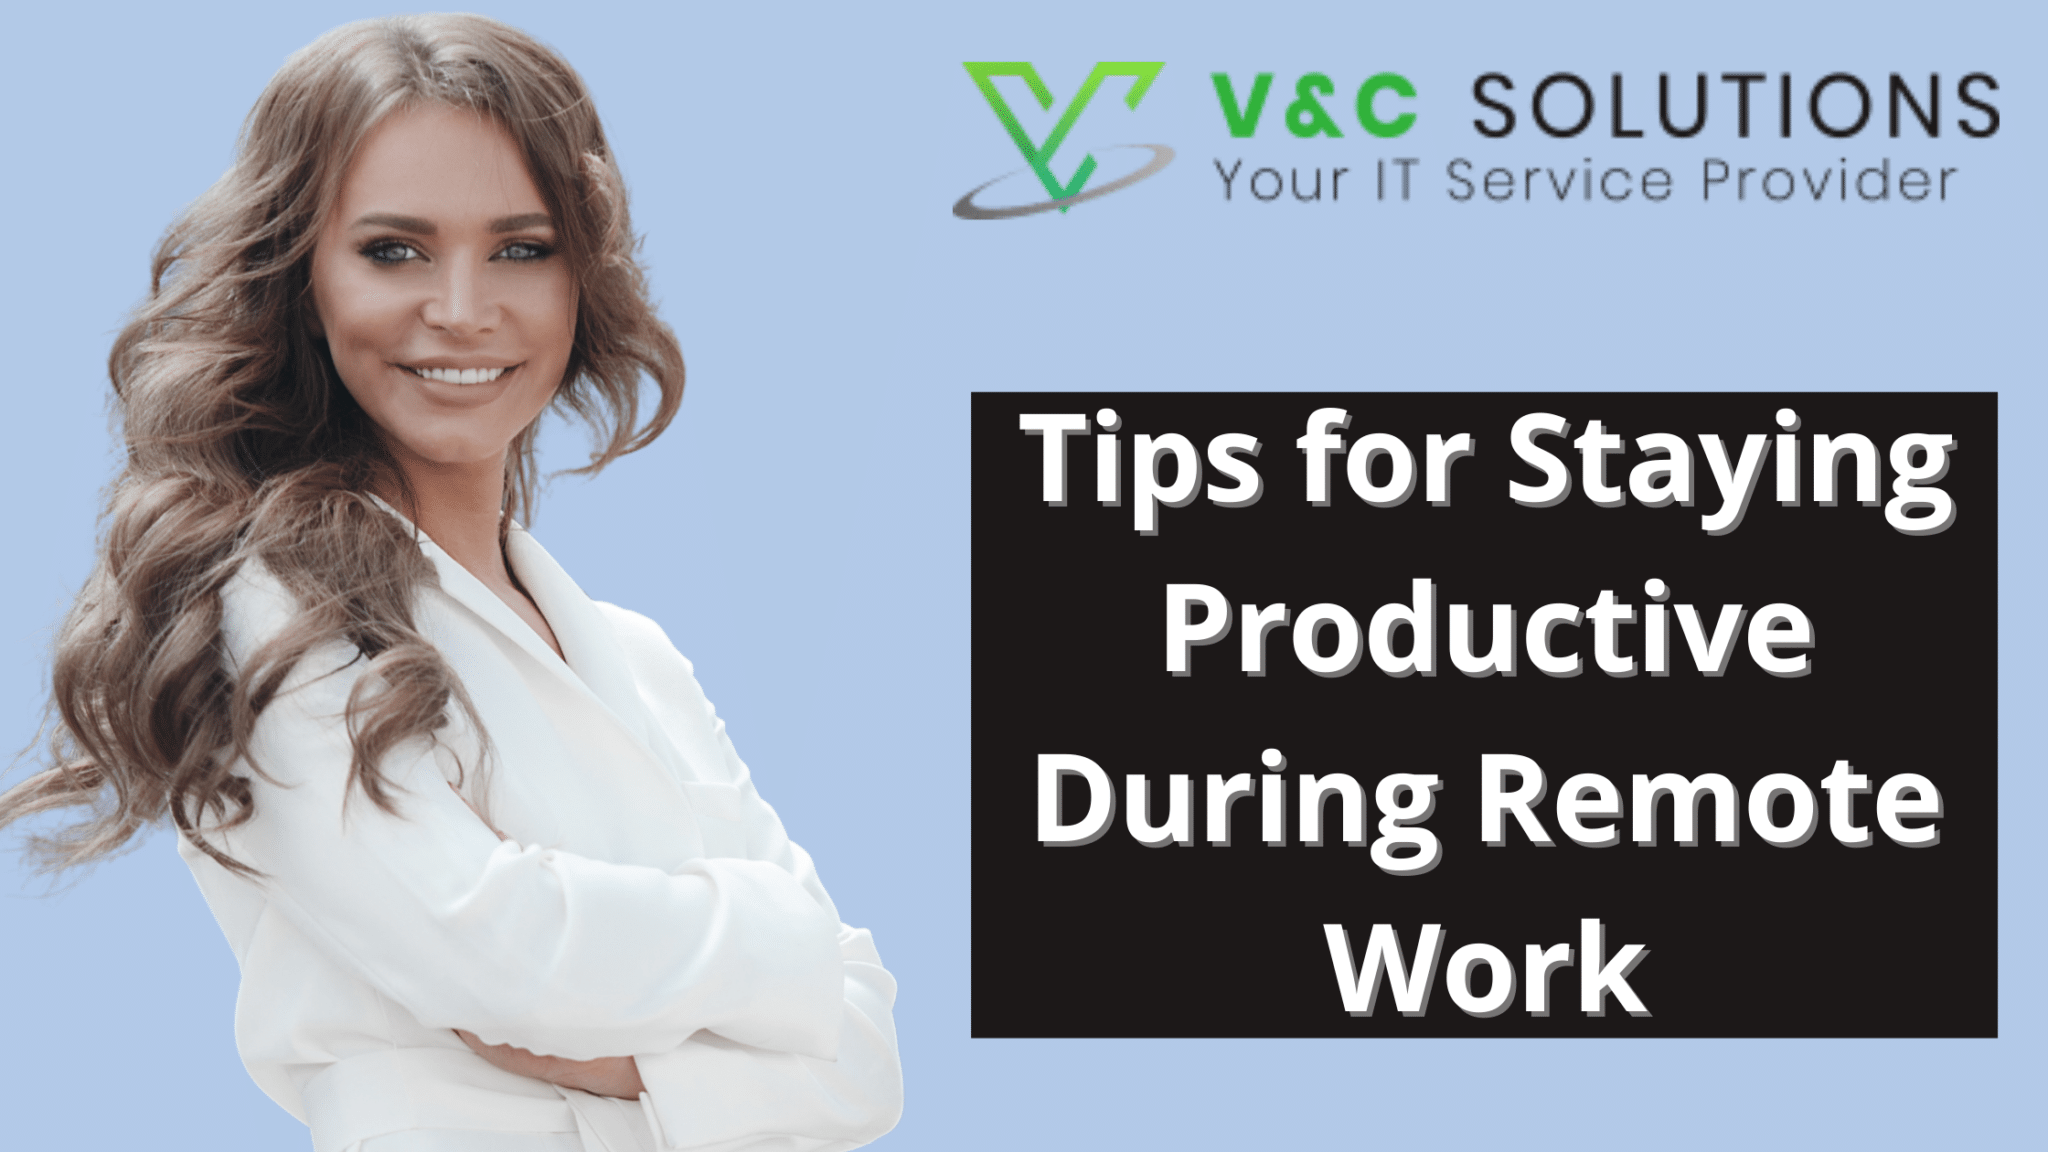 Tips for Staying Productive During Remote Work